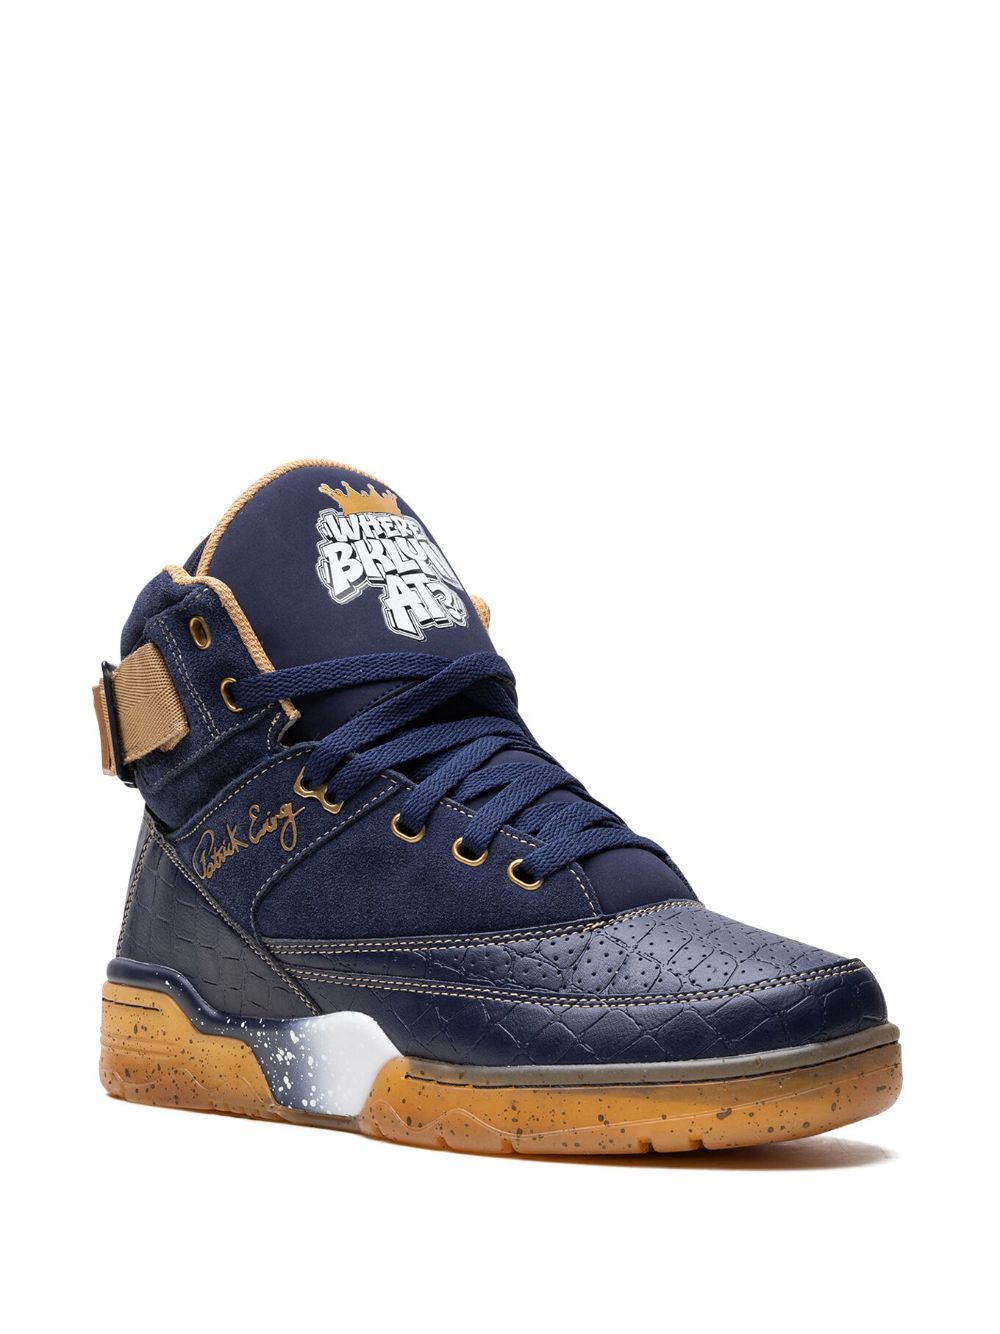 Ewing 33 "Where Brookly At?" high-top sneakers - Blauw